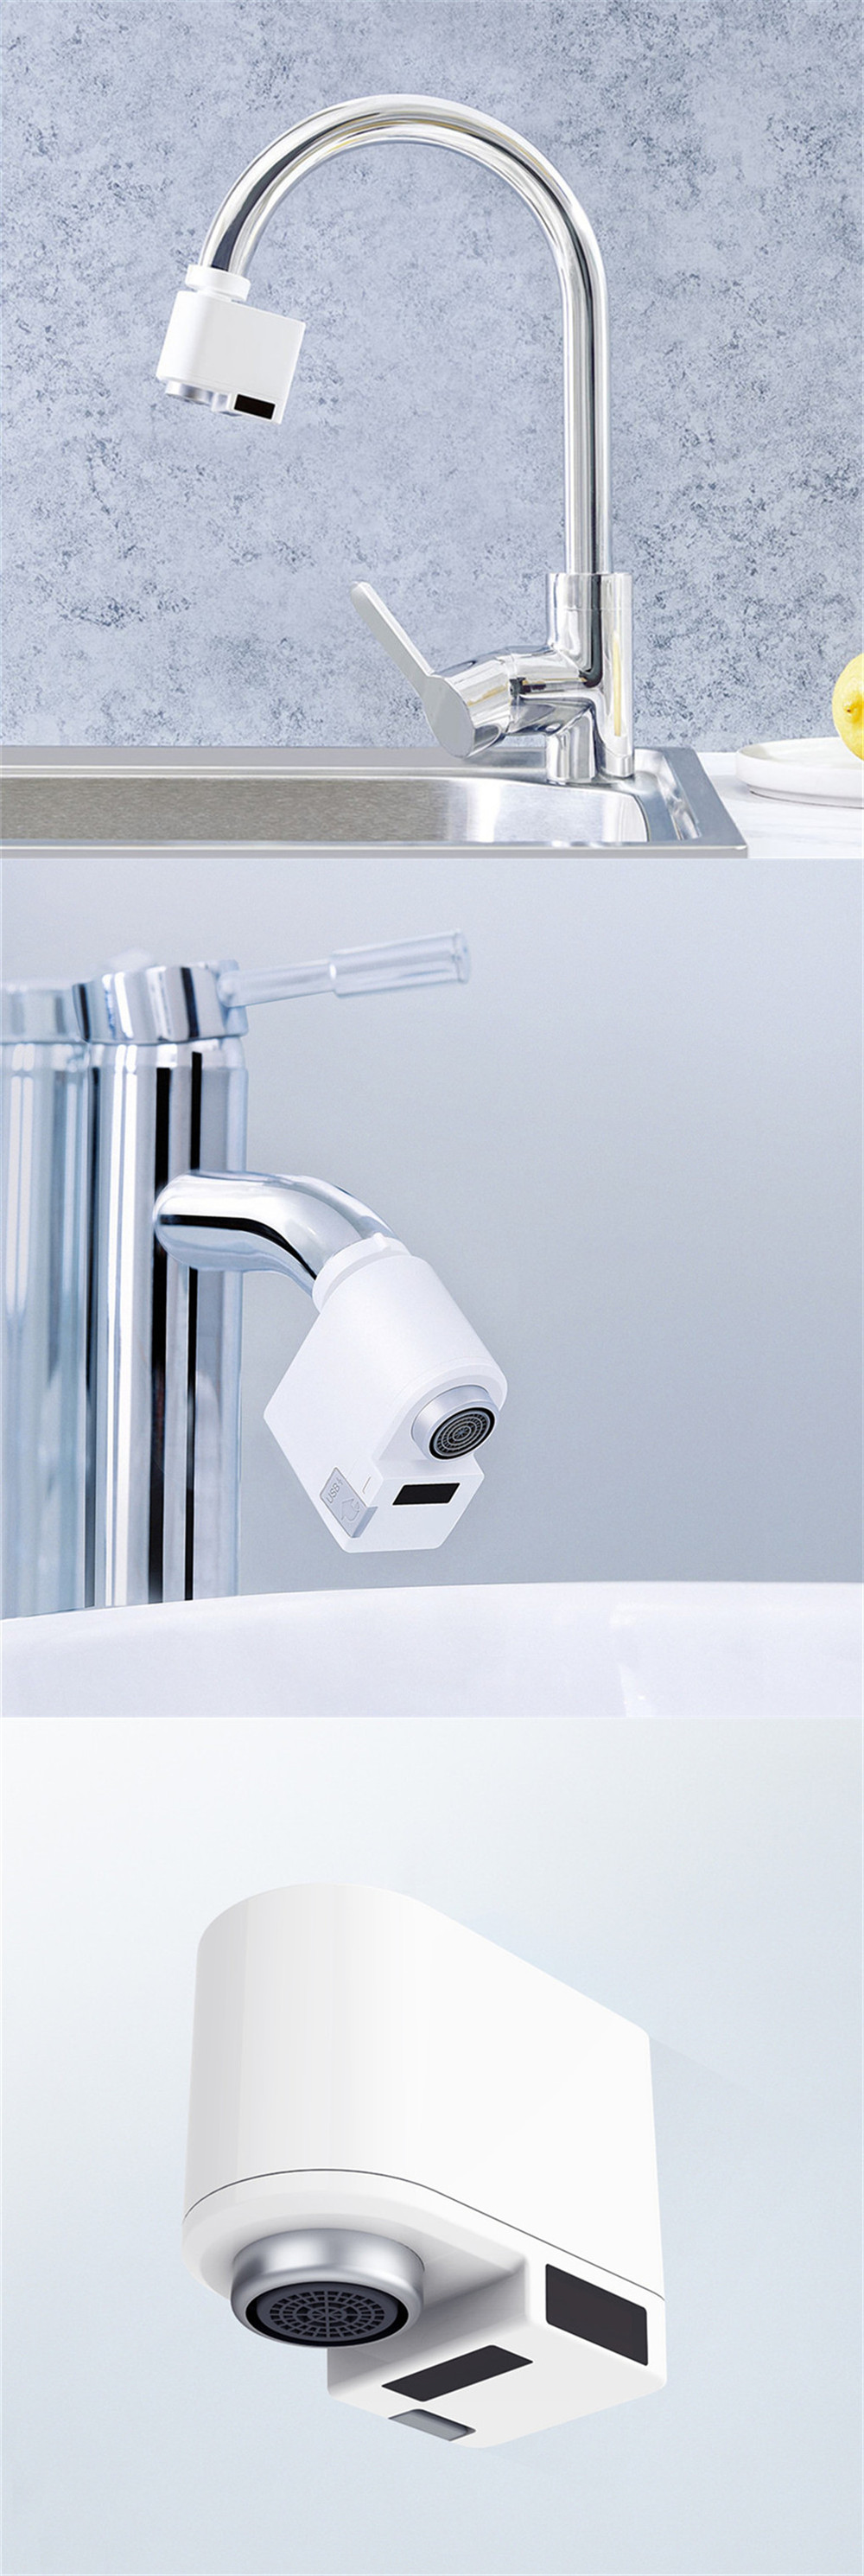 Xiaomi ZAJIA Automatic Sense Infrared Induction Water Saving Device For Kitchen Bathroom Sink Faucet 11